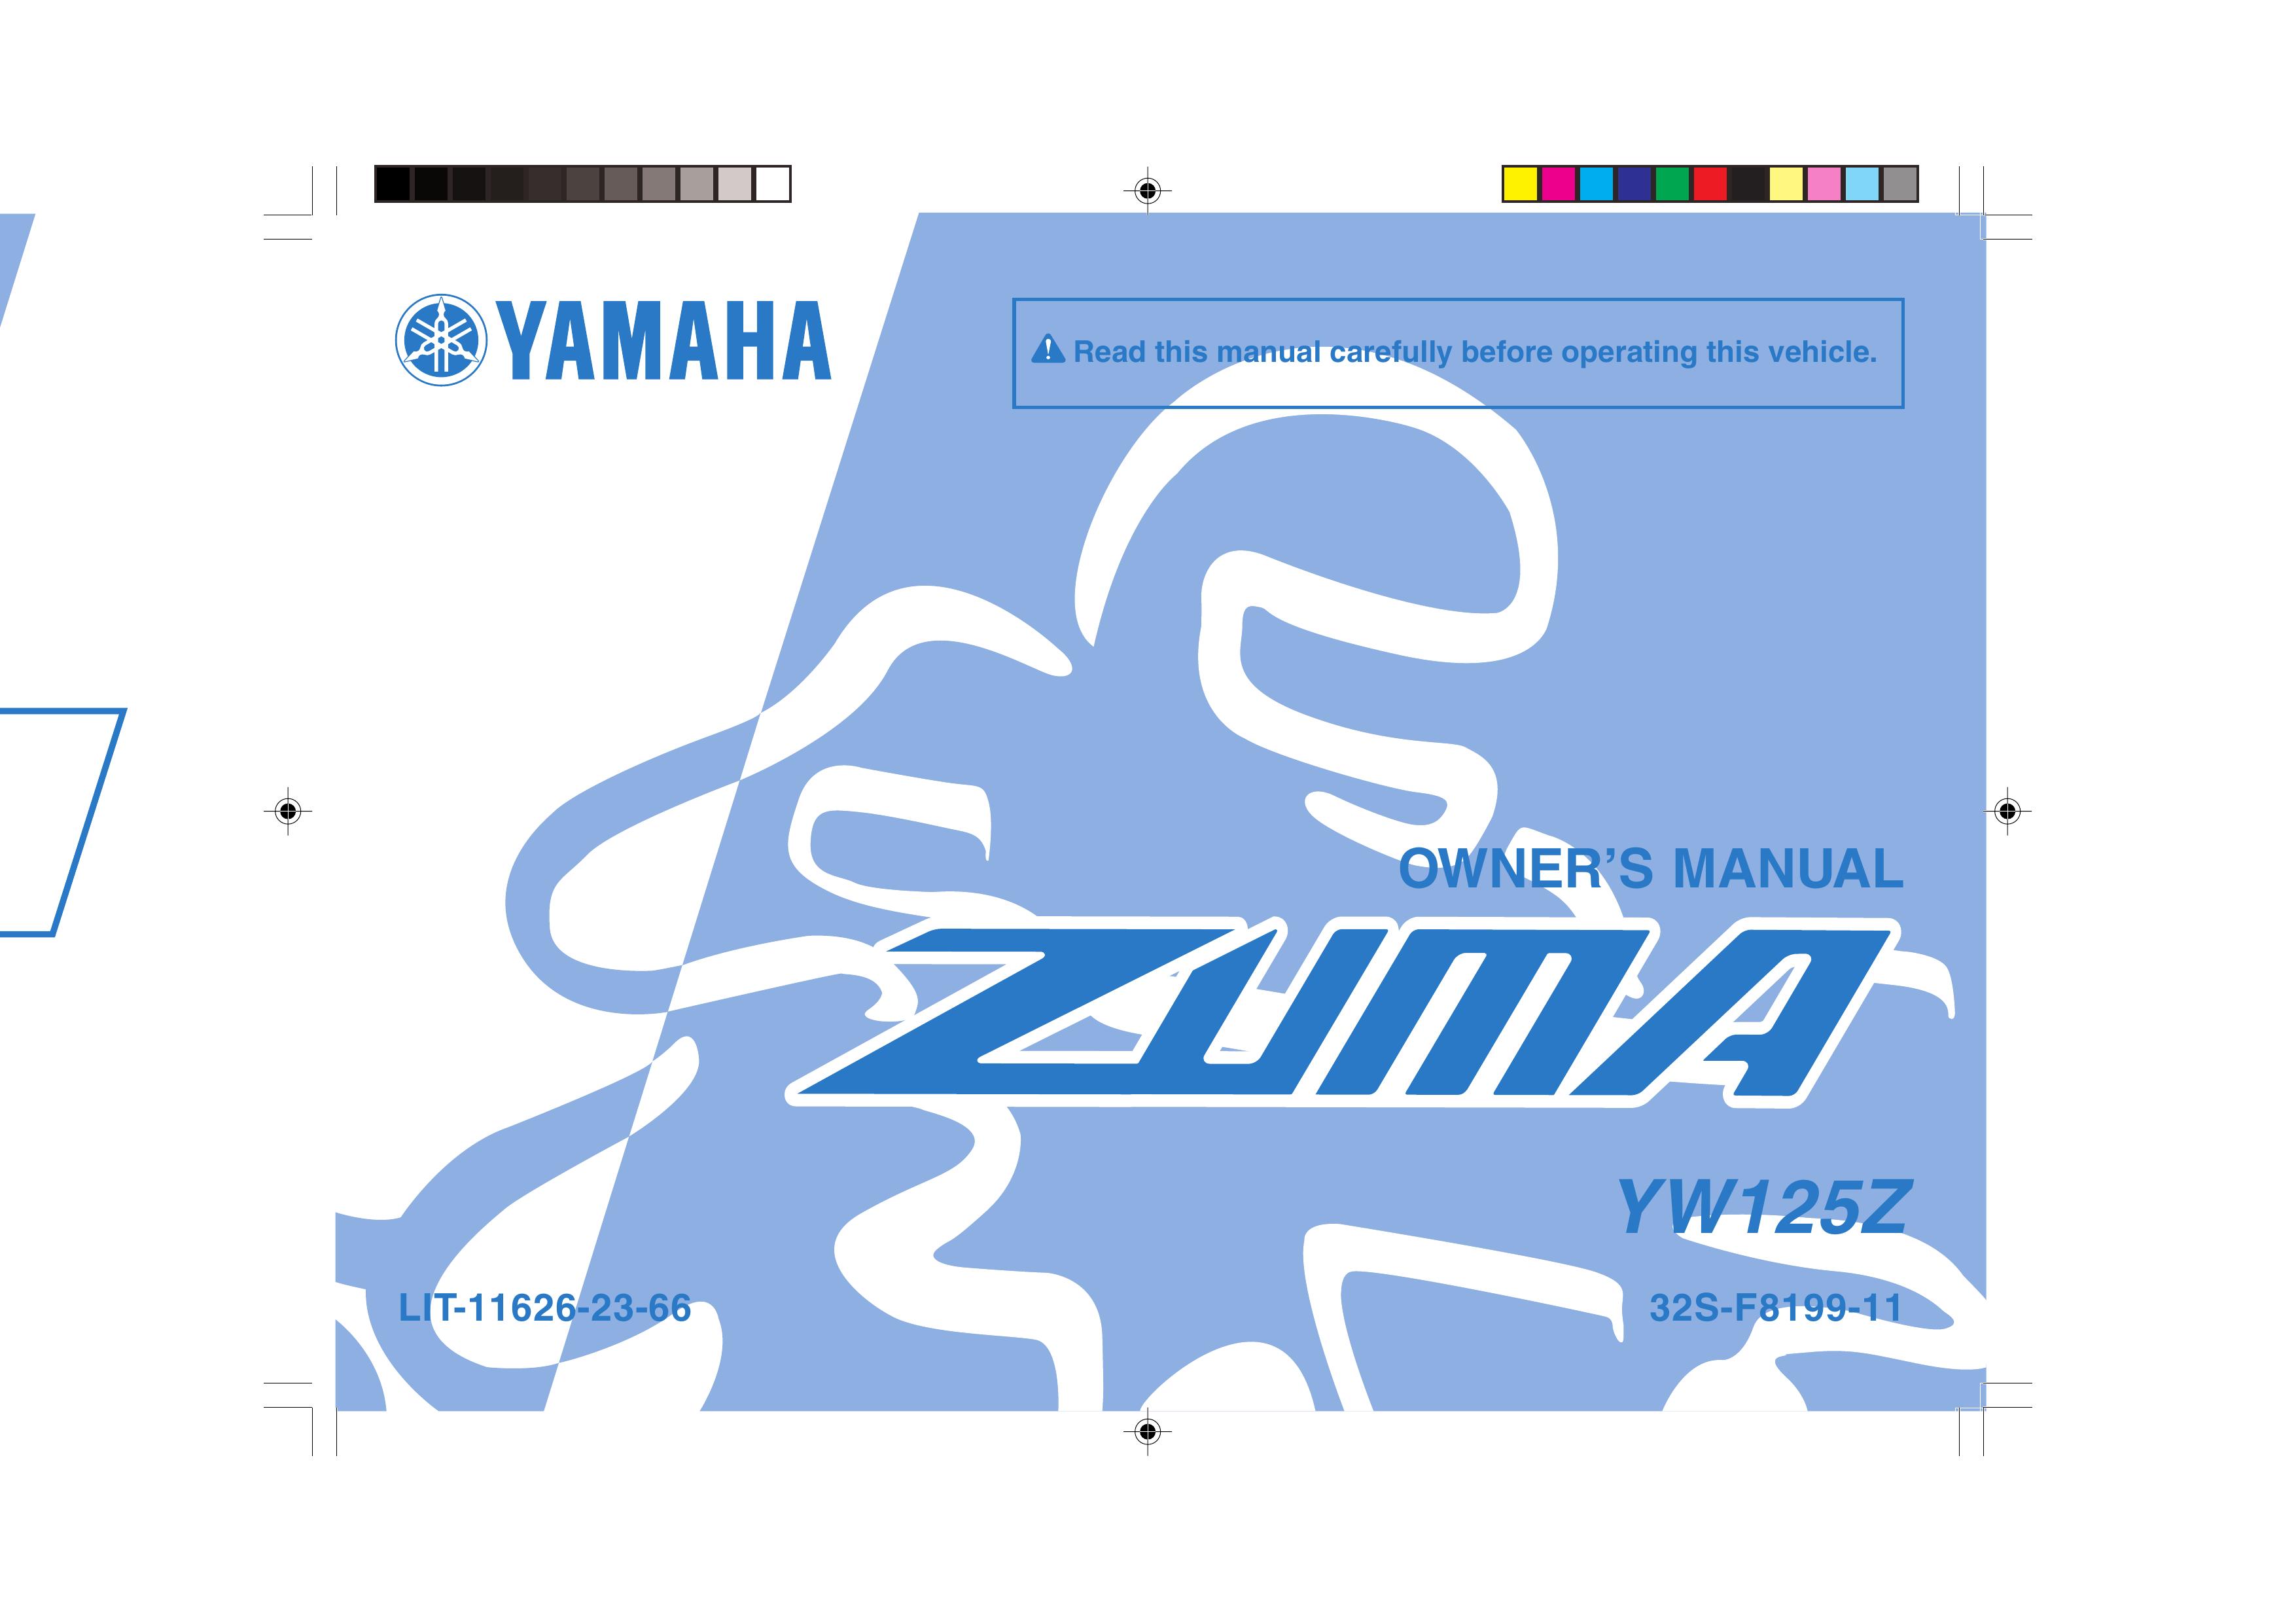 Yamaha YW125Z Mobility Scooter User Manual